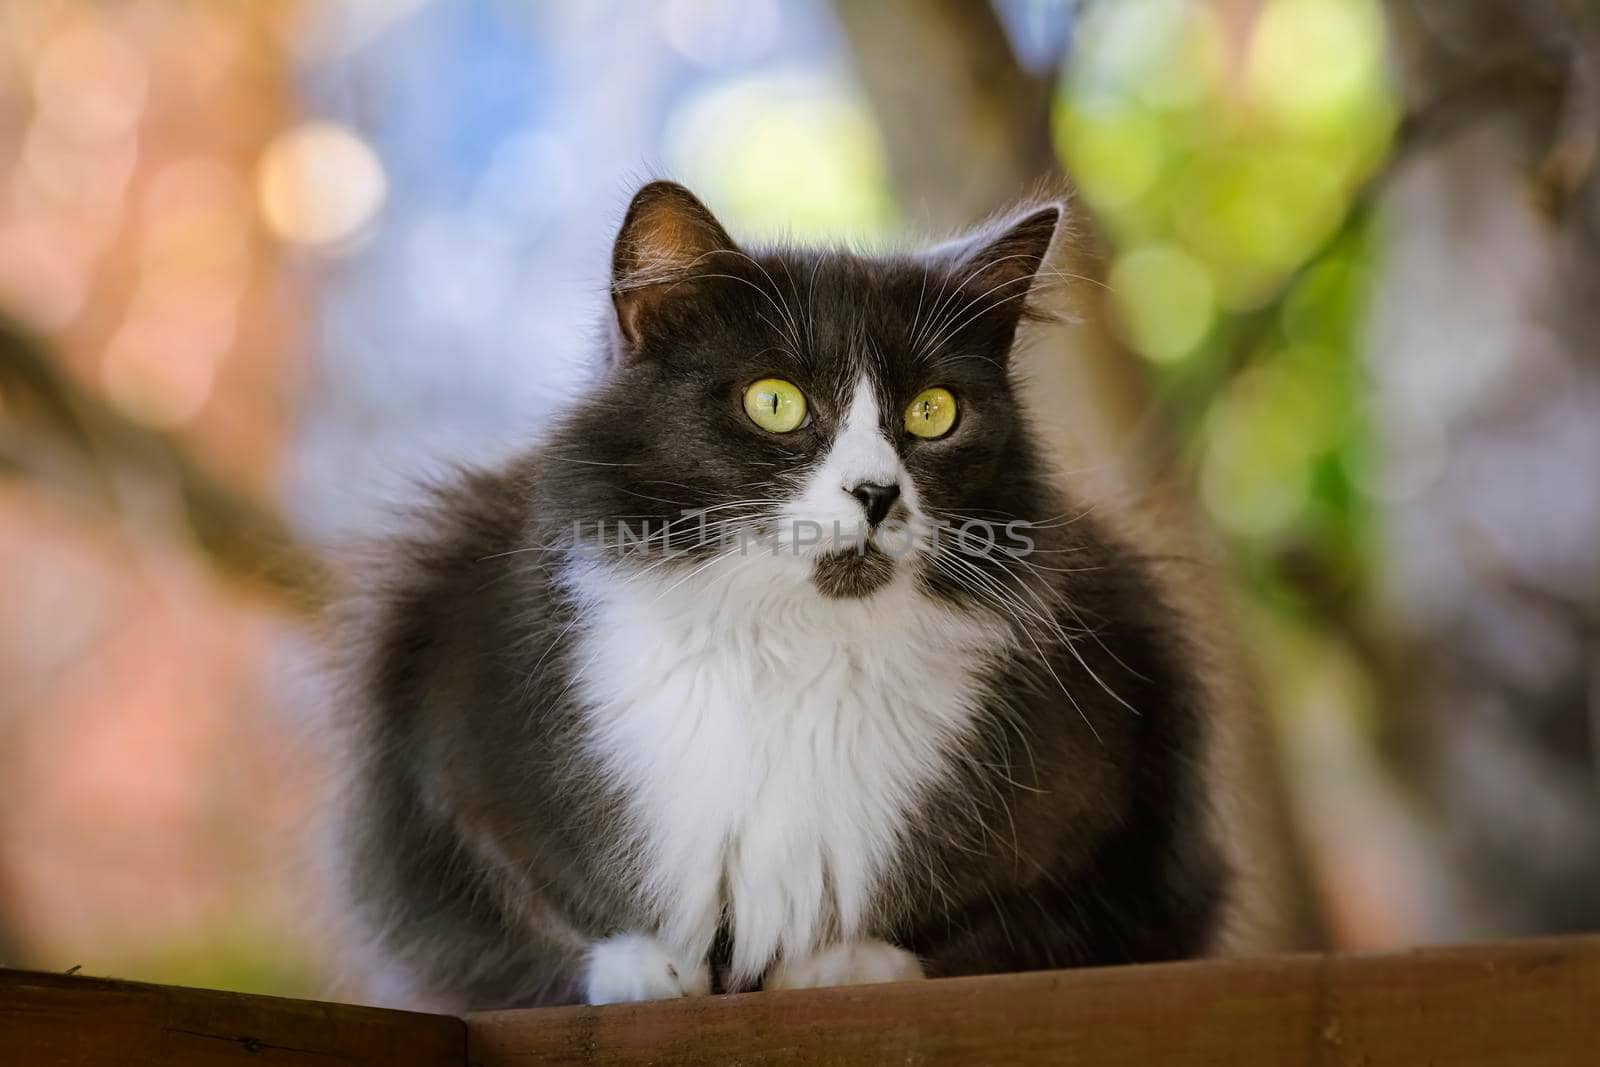 Black and white cat by SNR